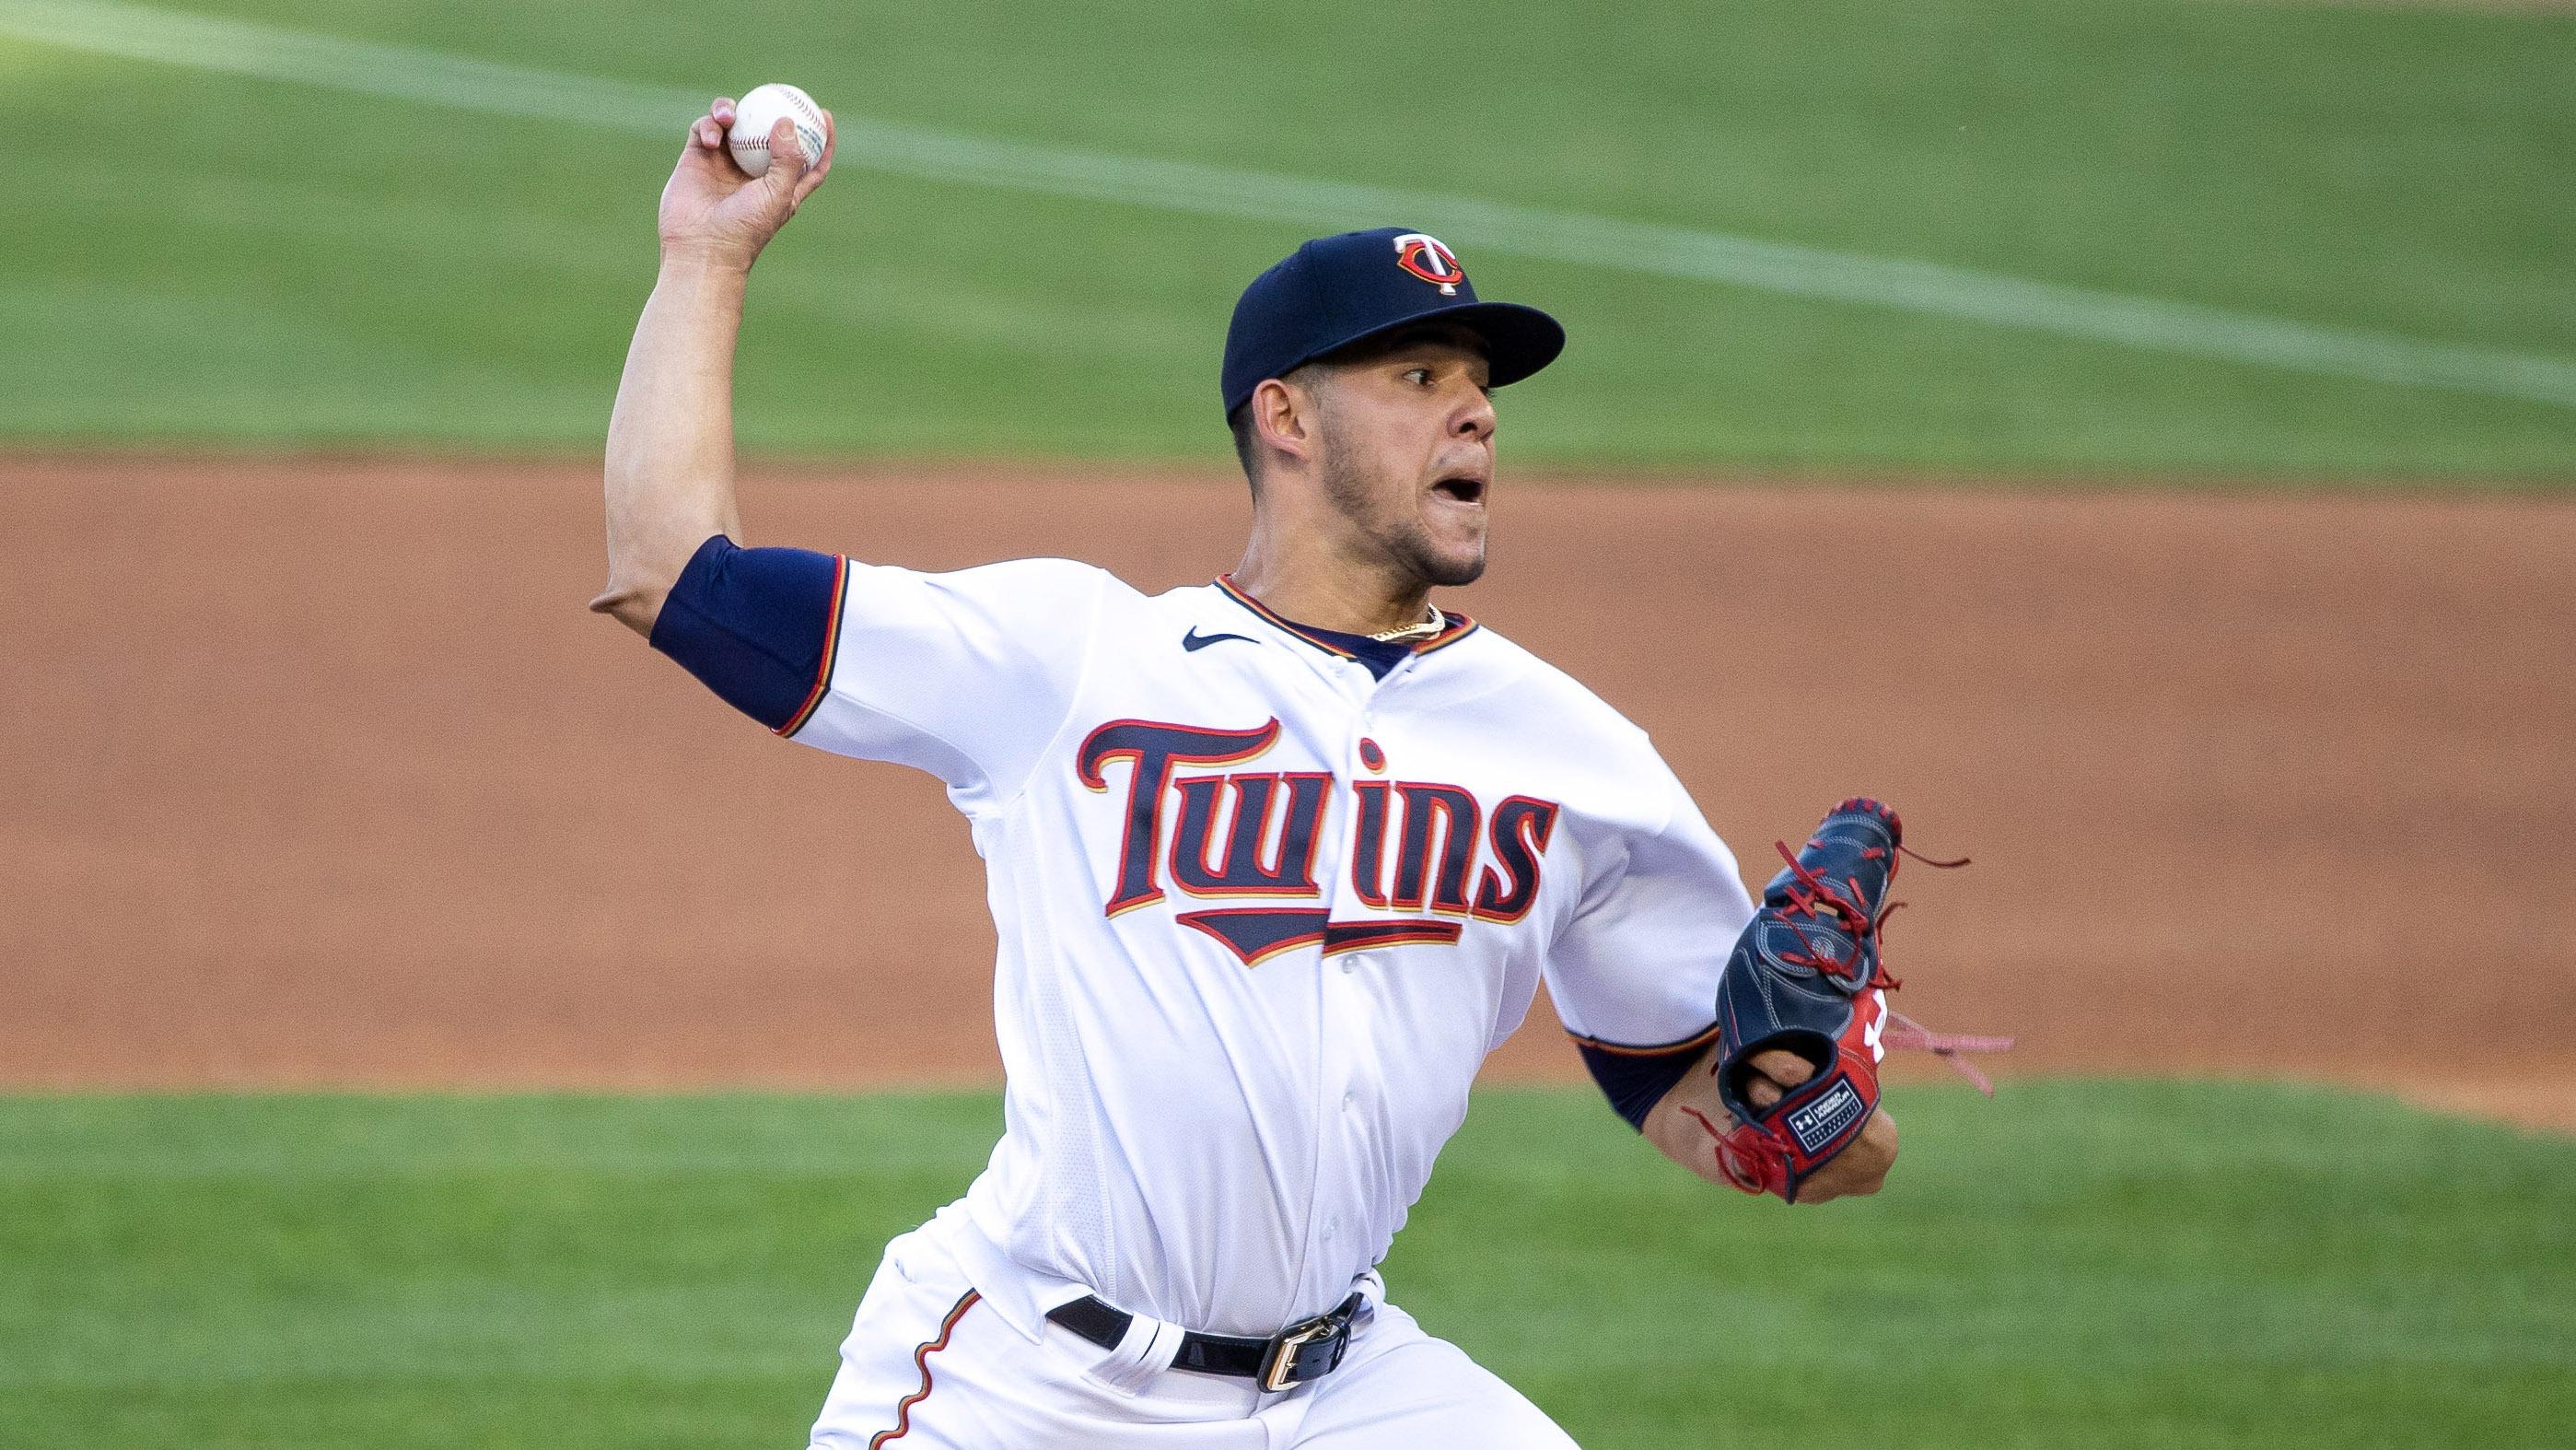 May 25, 2021; Minneapolis, Minnesota, USA; Minnesota Twins starting pitcher Jose Berrios (17) pitches during the first inning against the Baltimore Orioles at Target Field. / Jordan Johnson-USA TODAY Sports